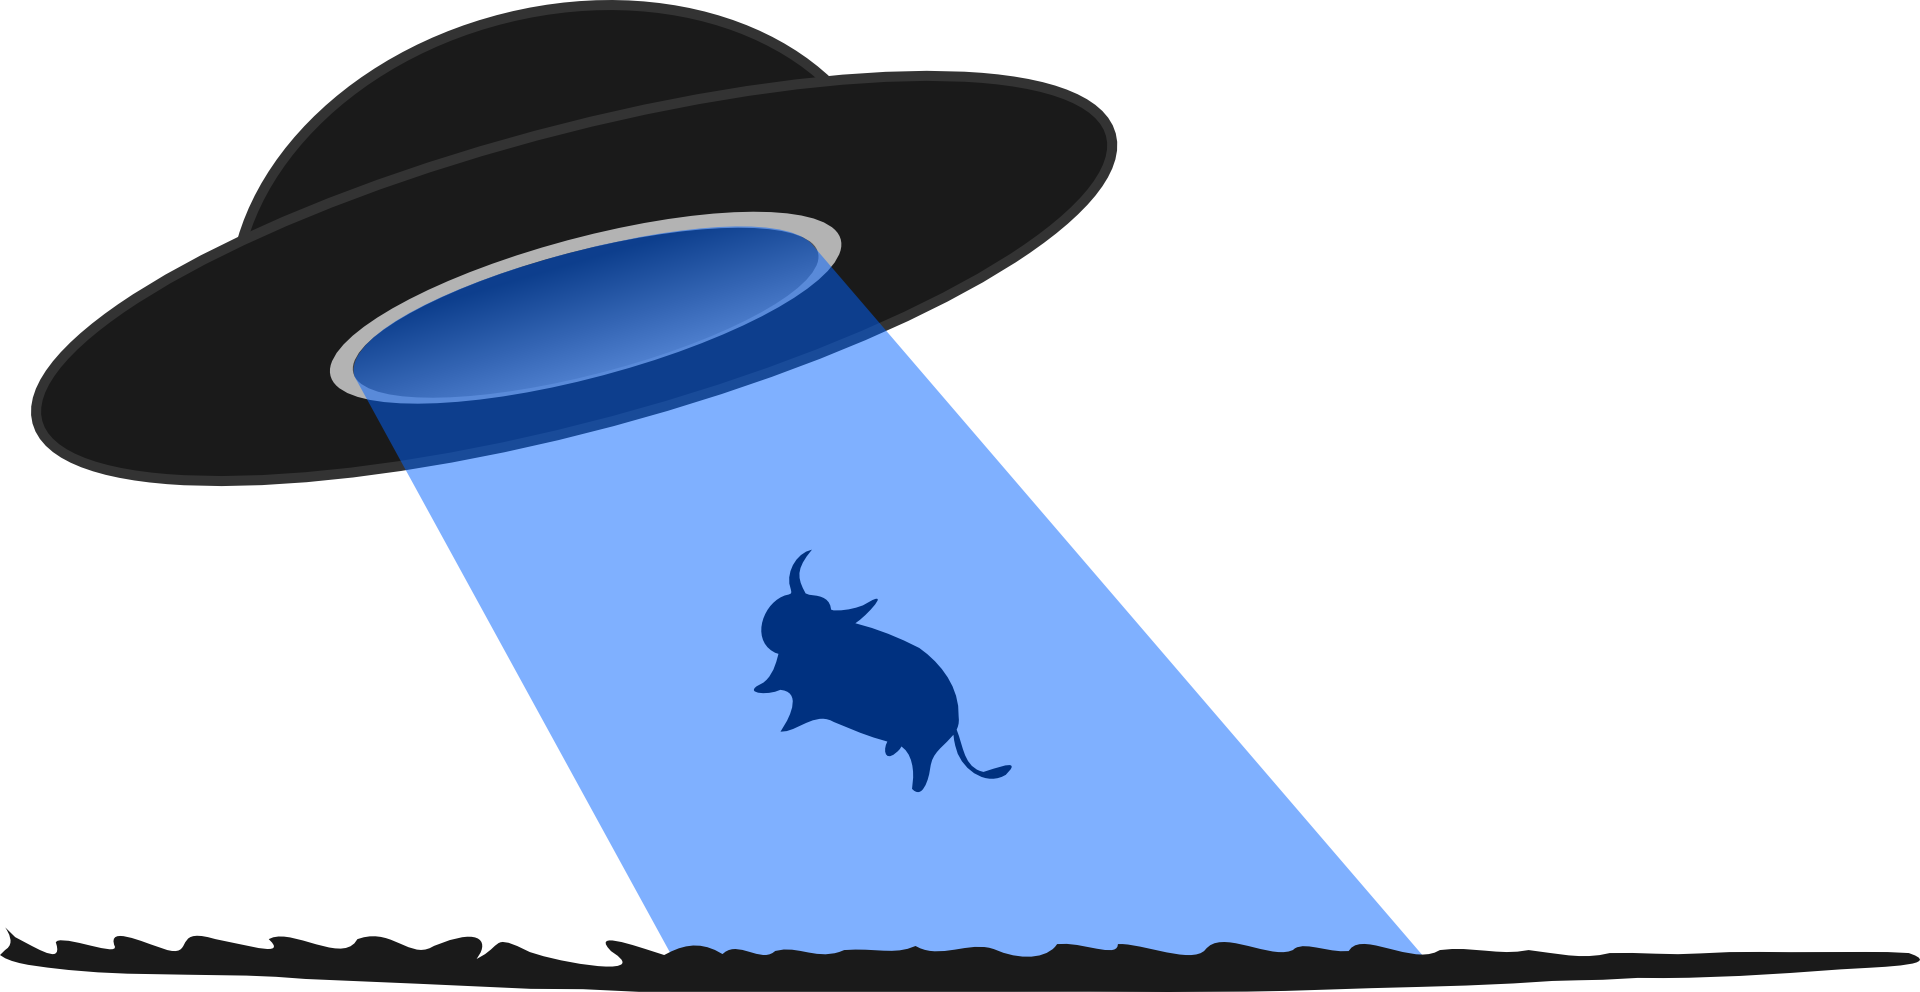 UFO, flying saucer, cattle mutilation, abduction, cow